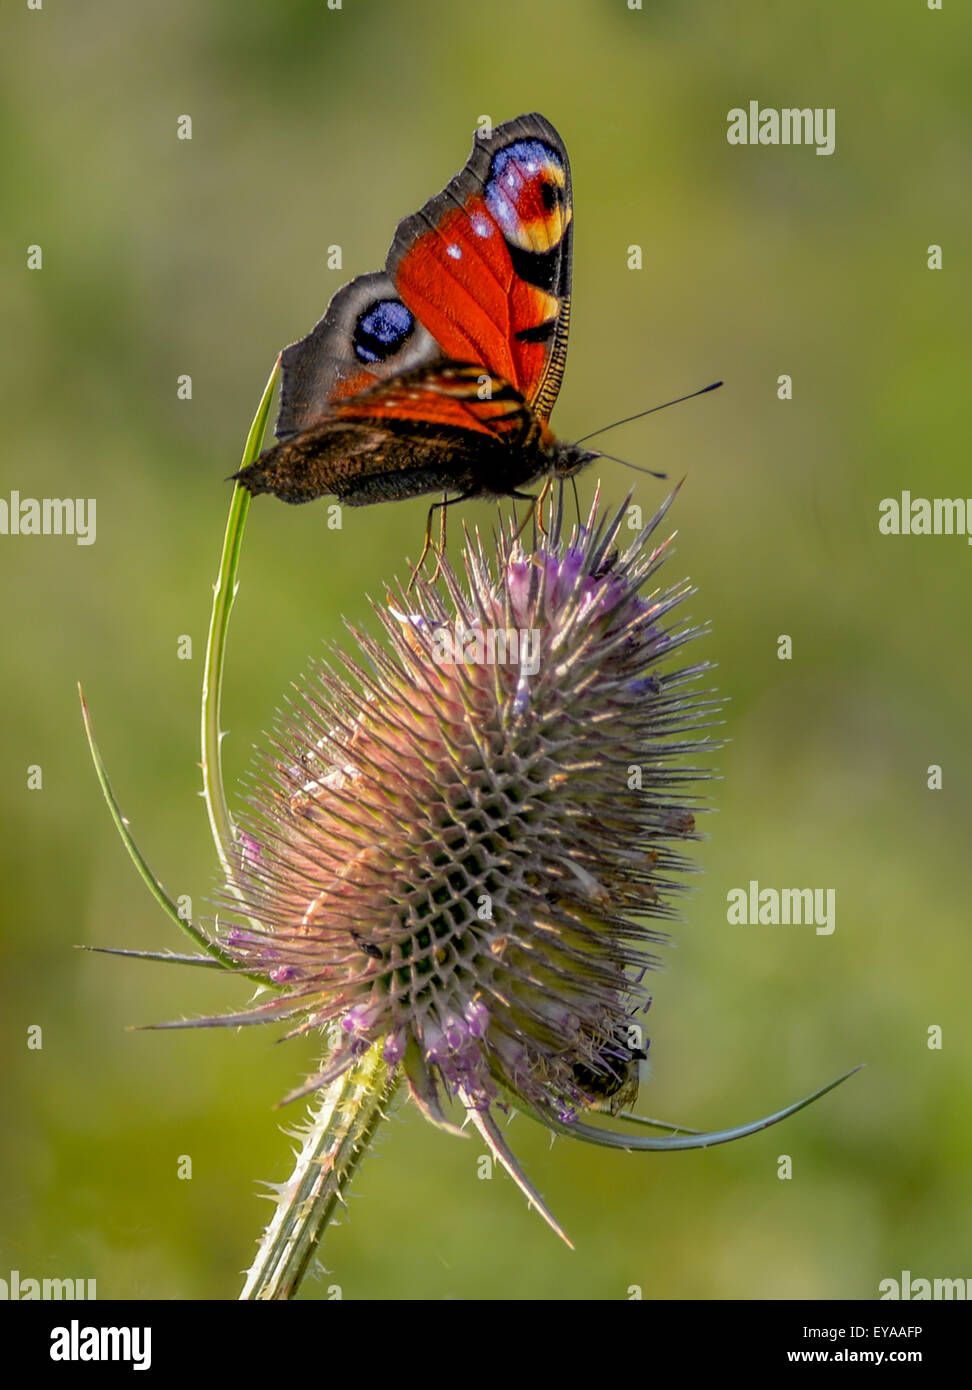 peacock, butterfly, flower, nature, insect, colorful, green, macro, beauty, season, animal, beautiful, summer,  teasel, Stock Photo